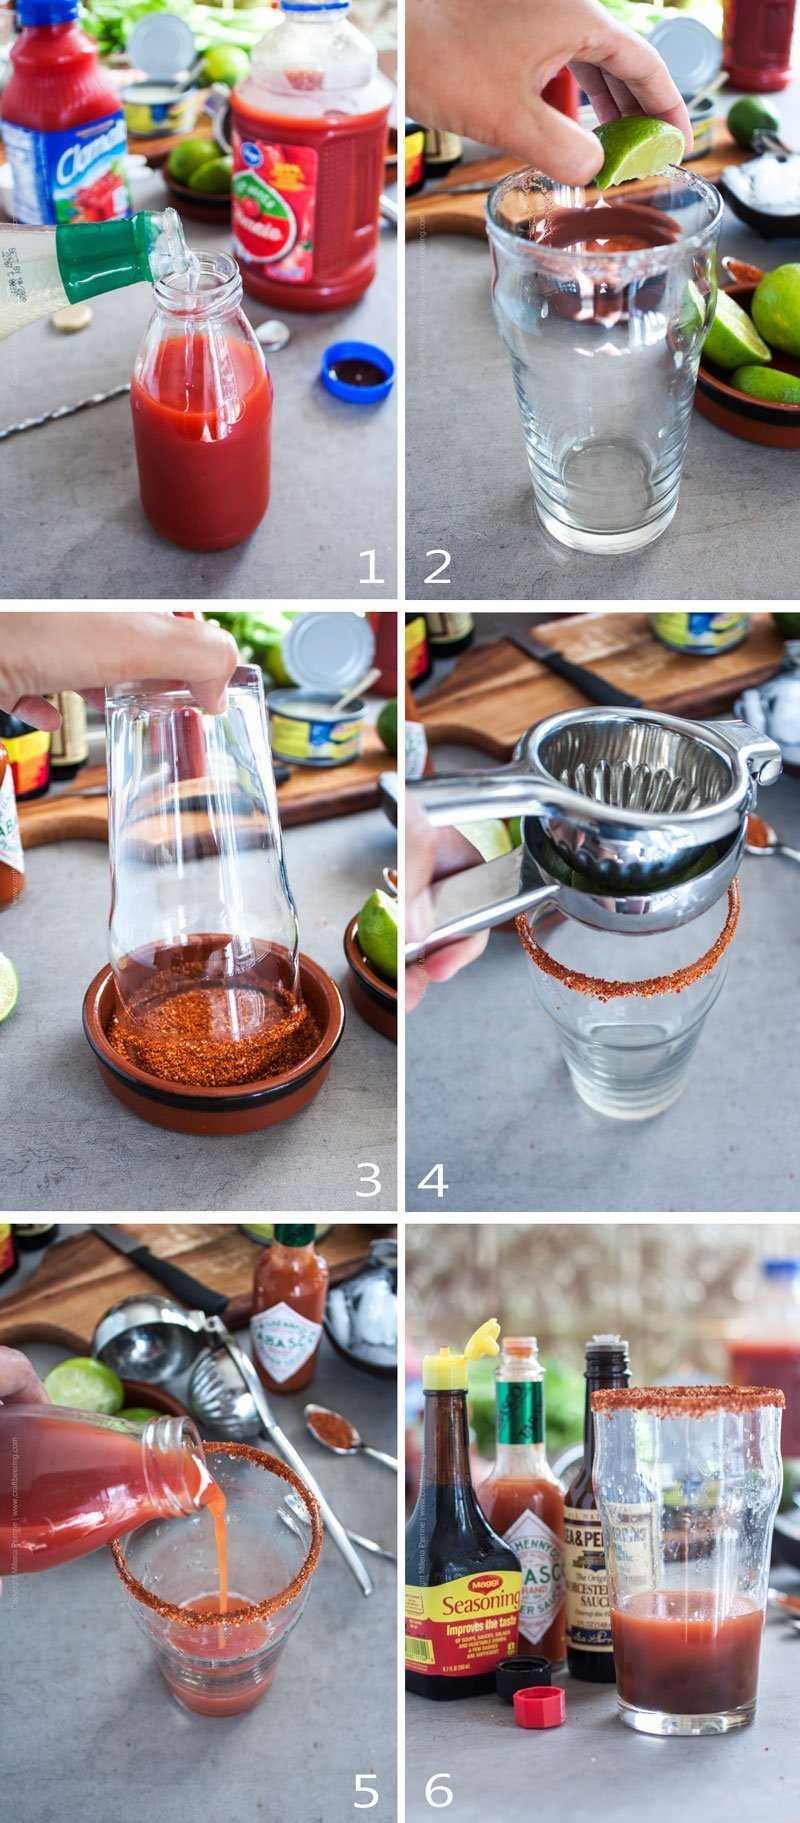 How to make clamato beer cocktail - step by step 1